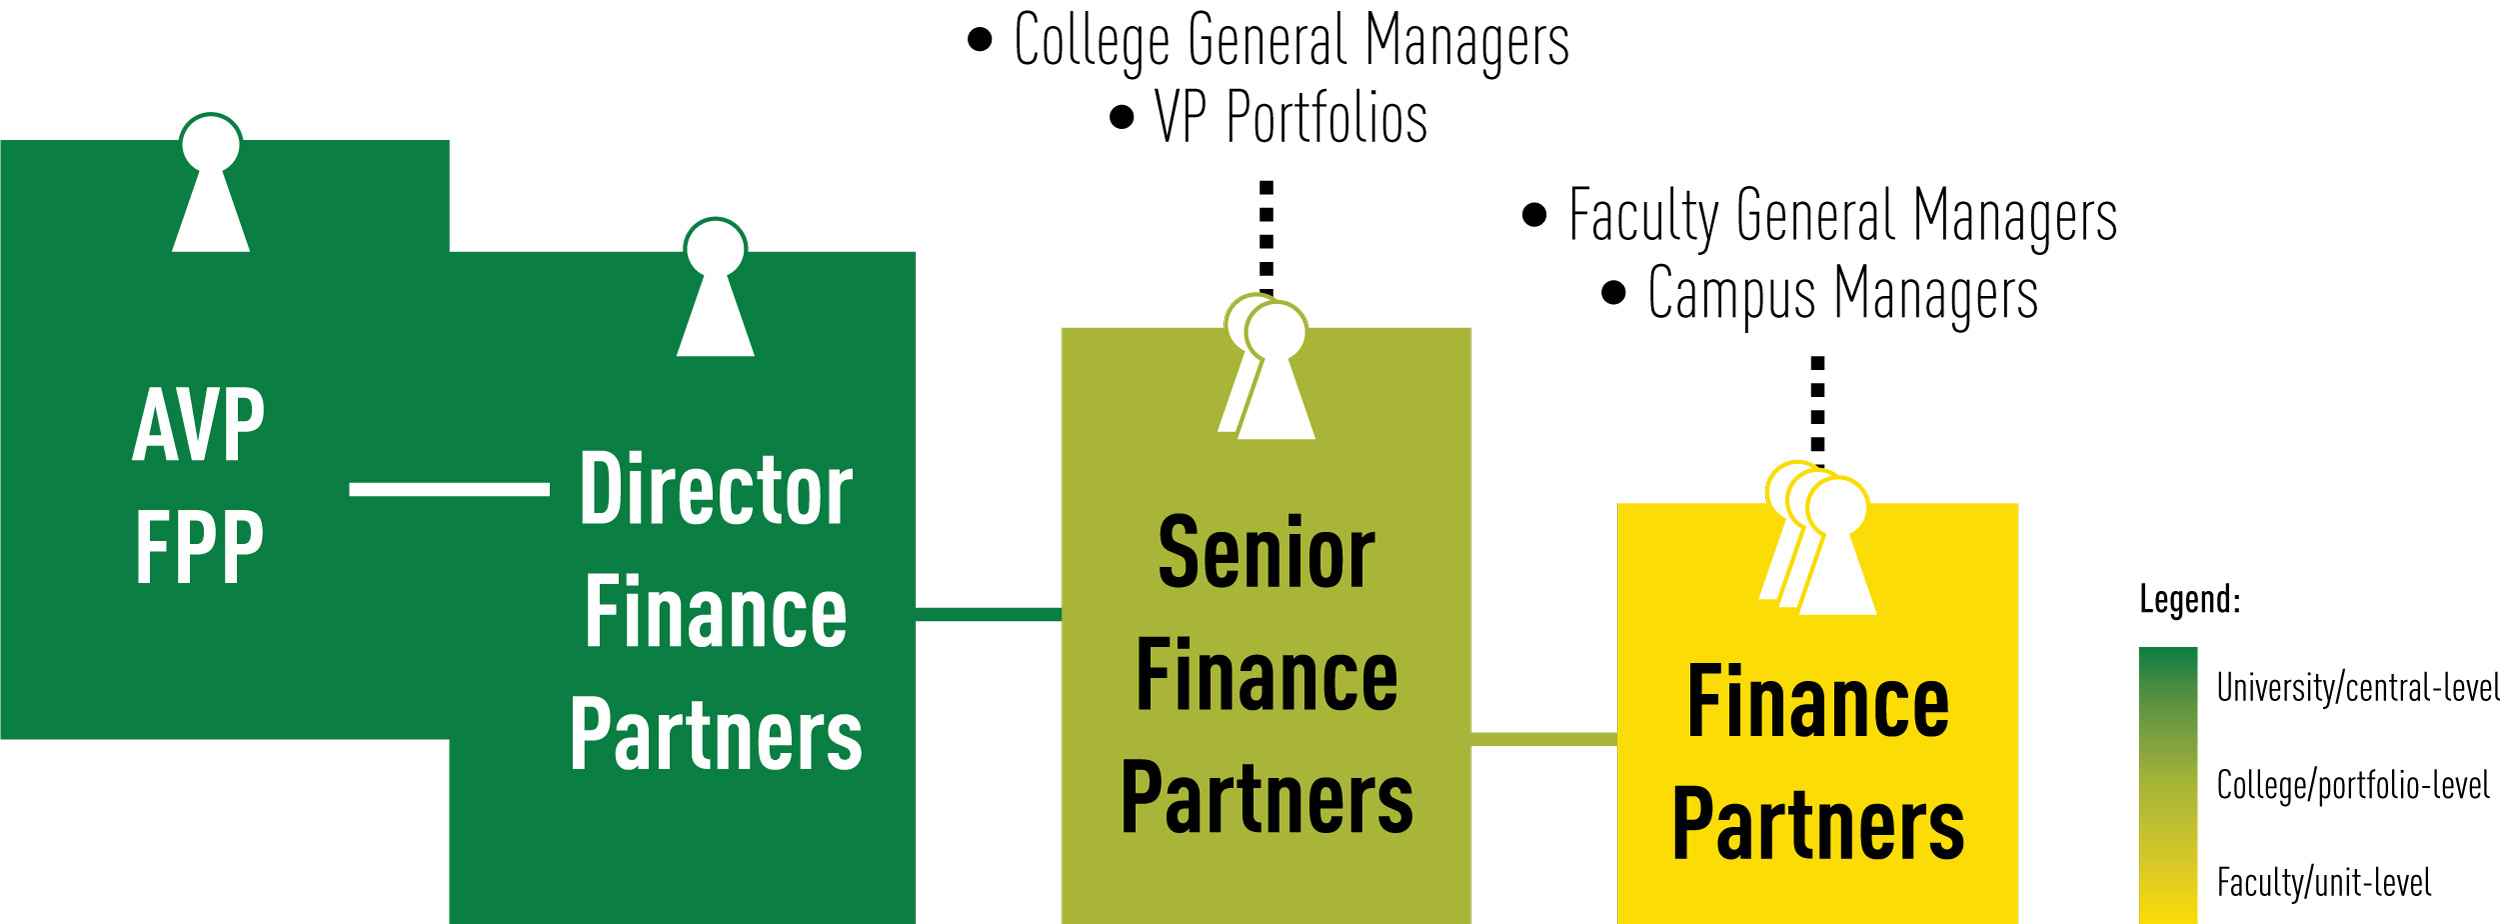 Finance partner reporting structure